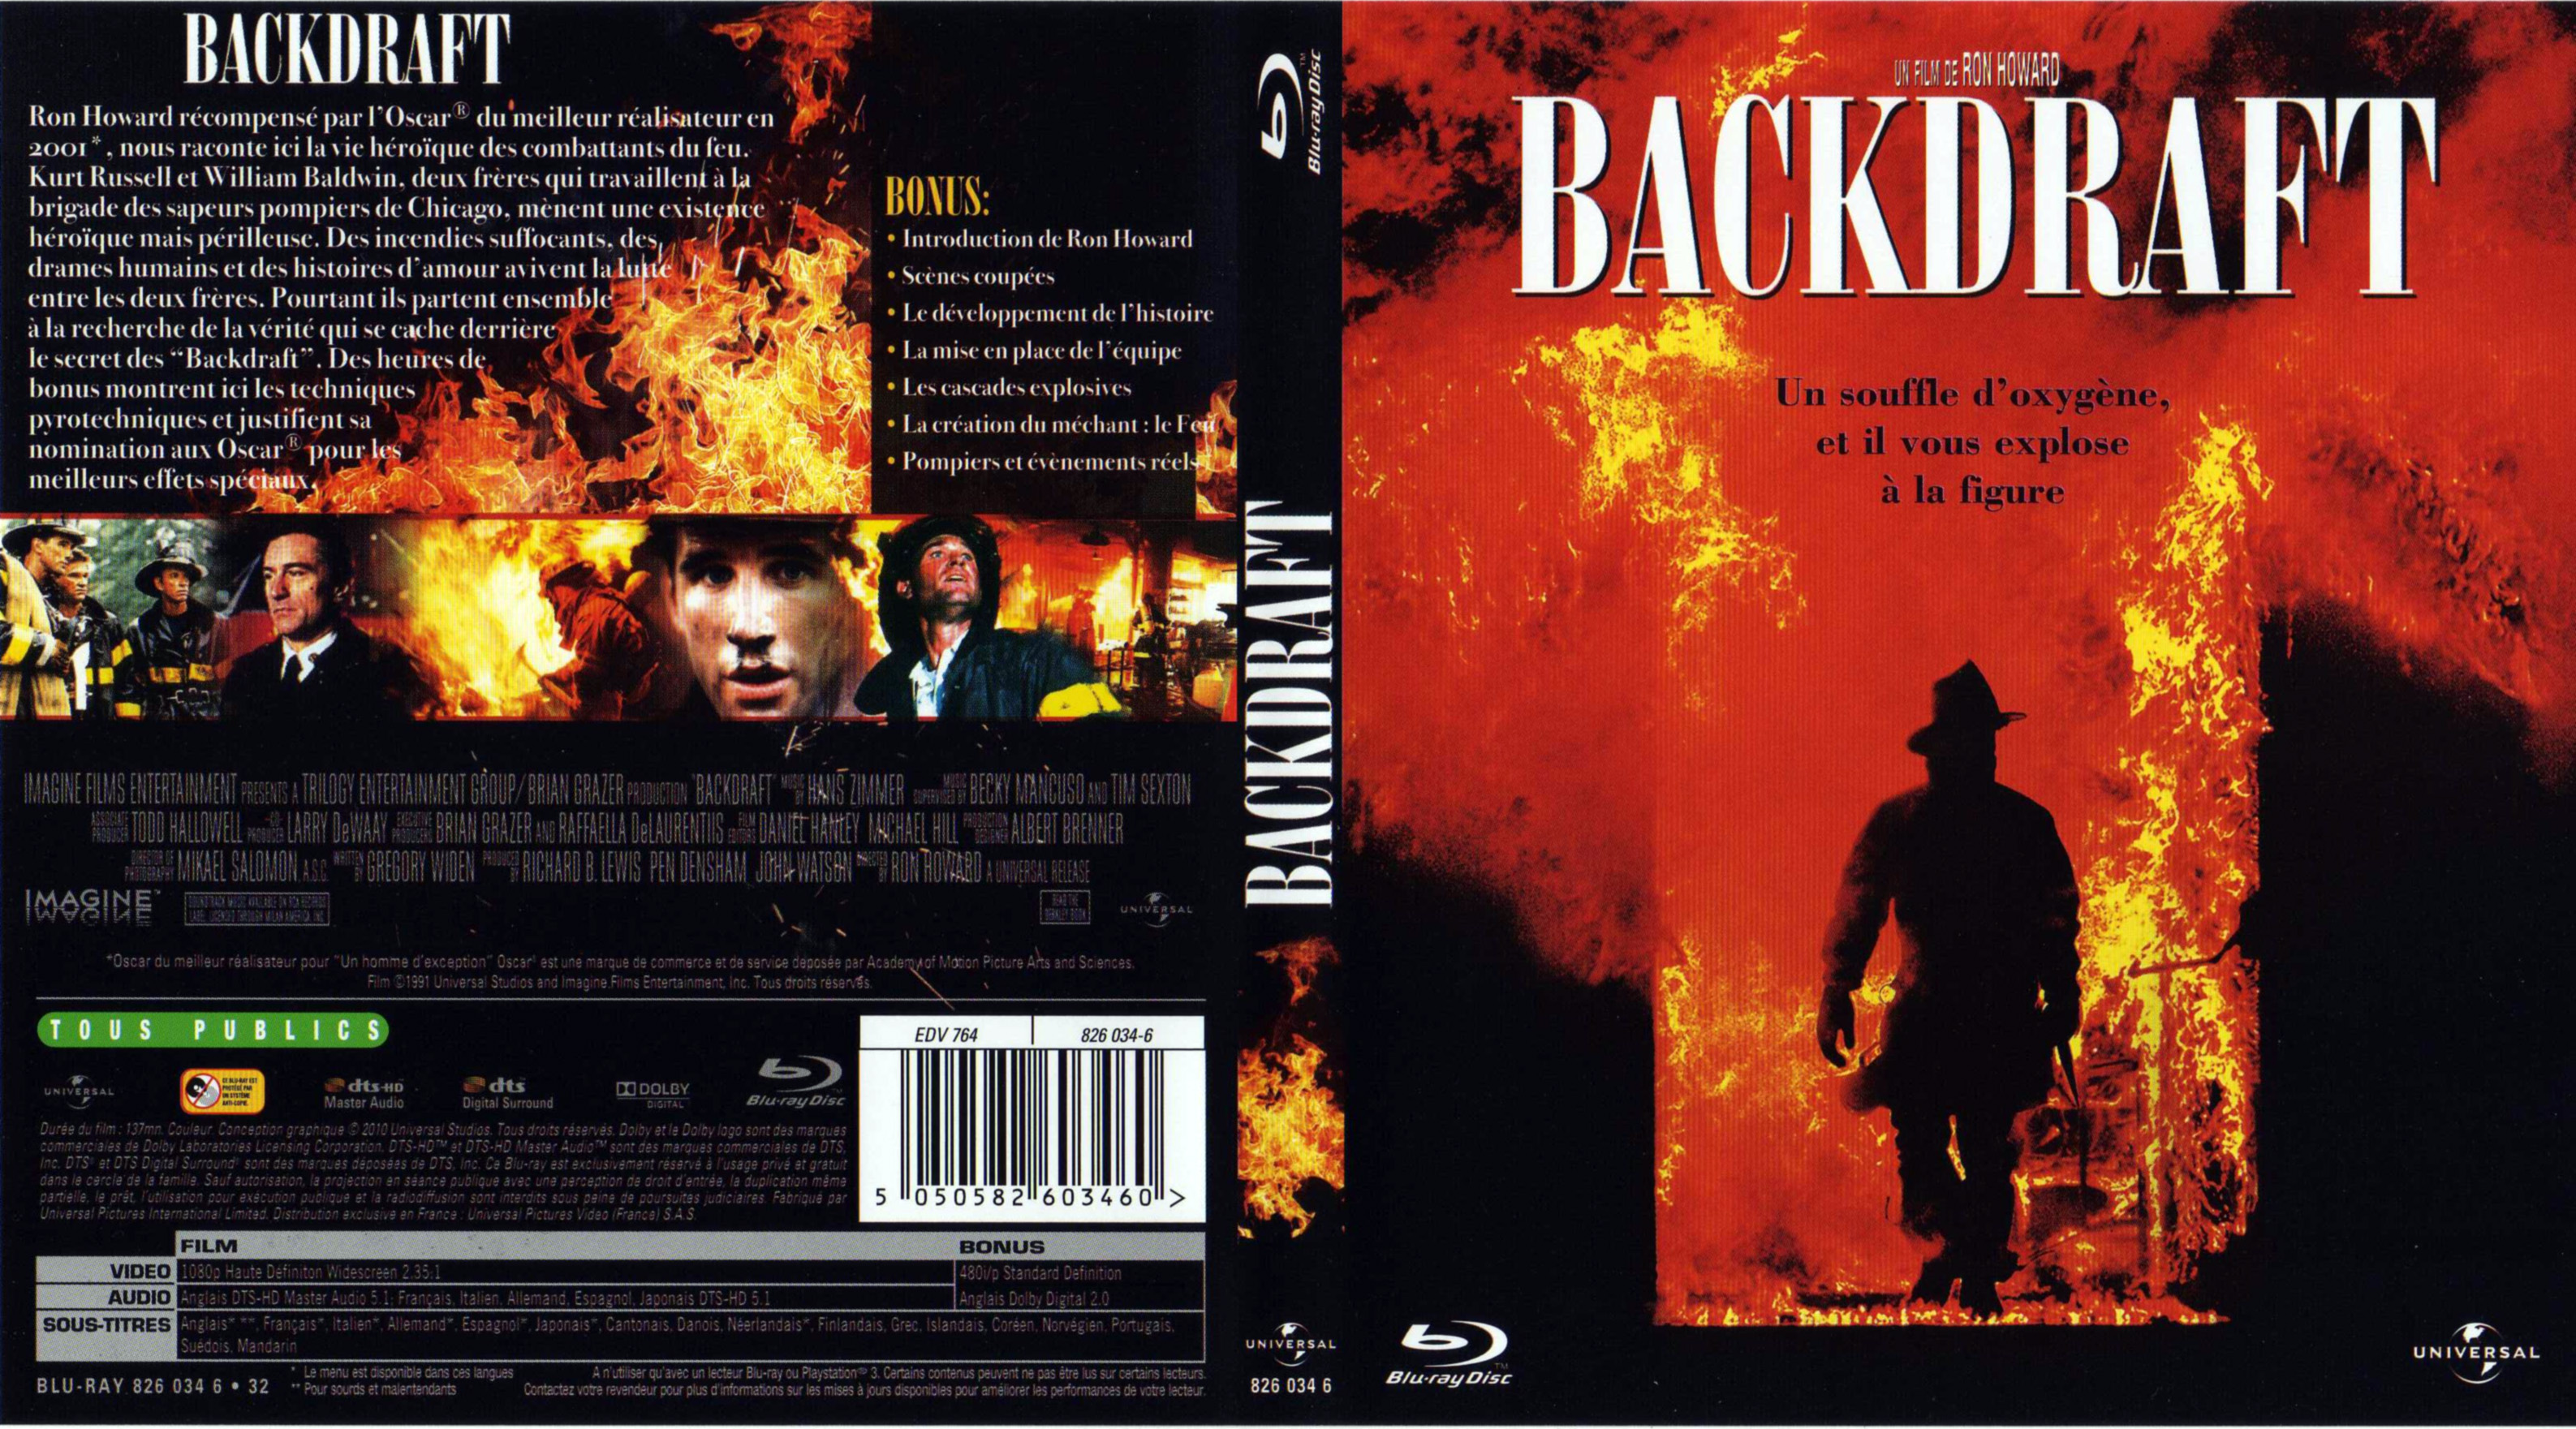 Jaquette DVD Backdraft (BLU-RAY)